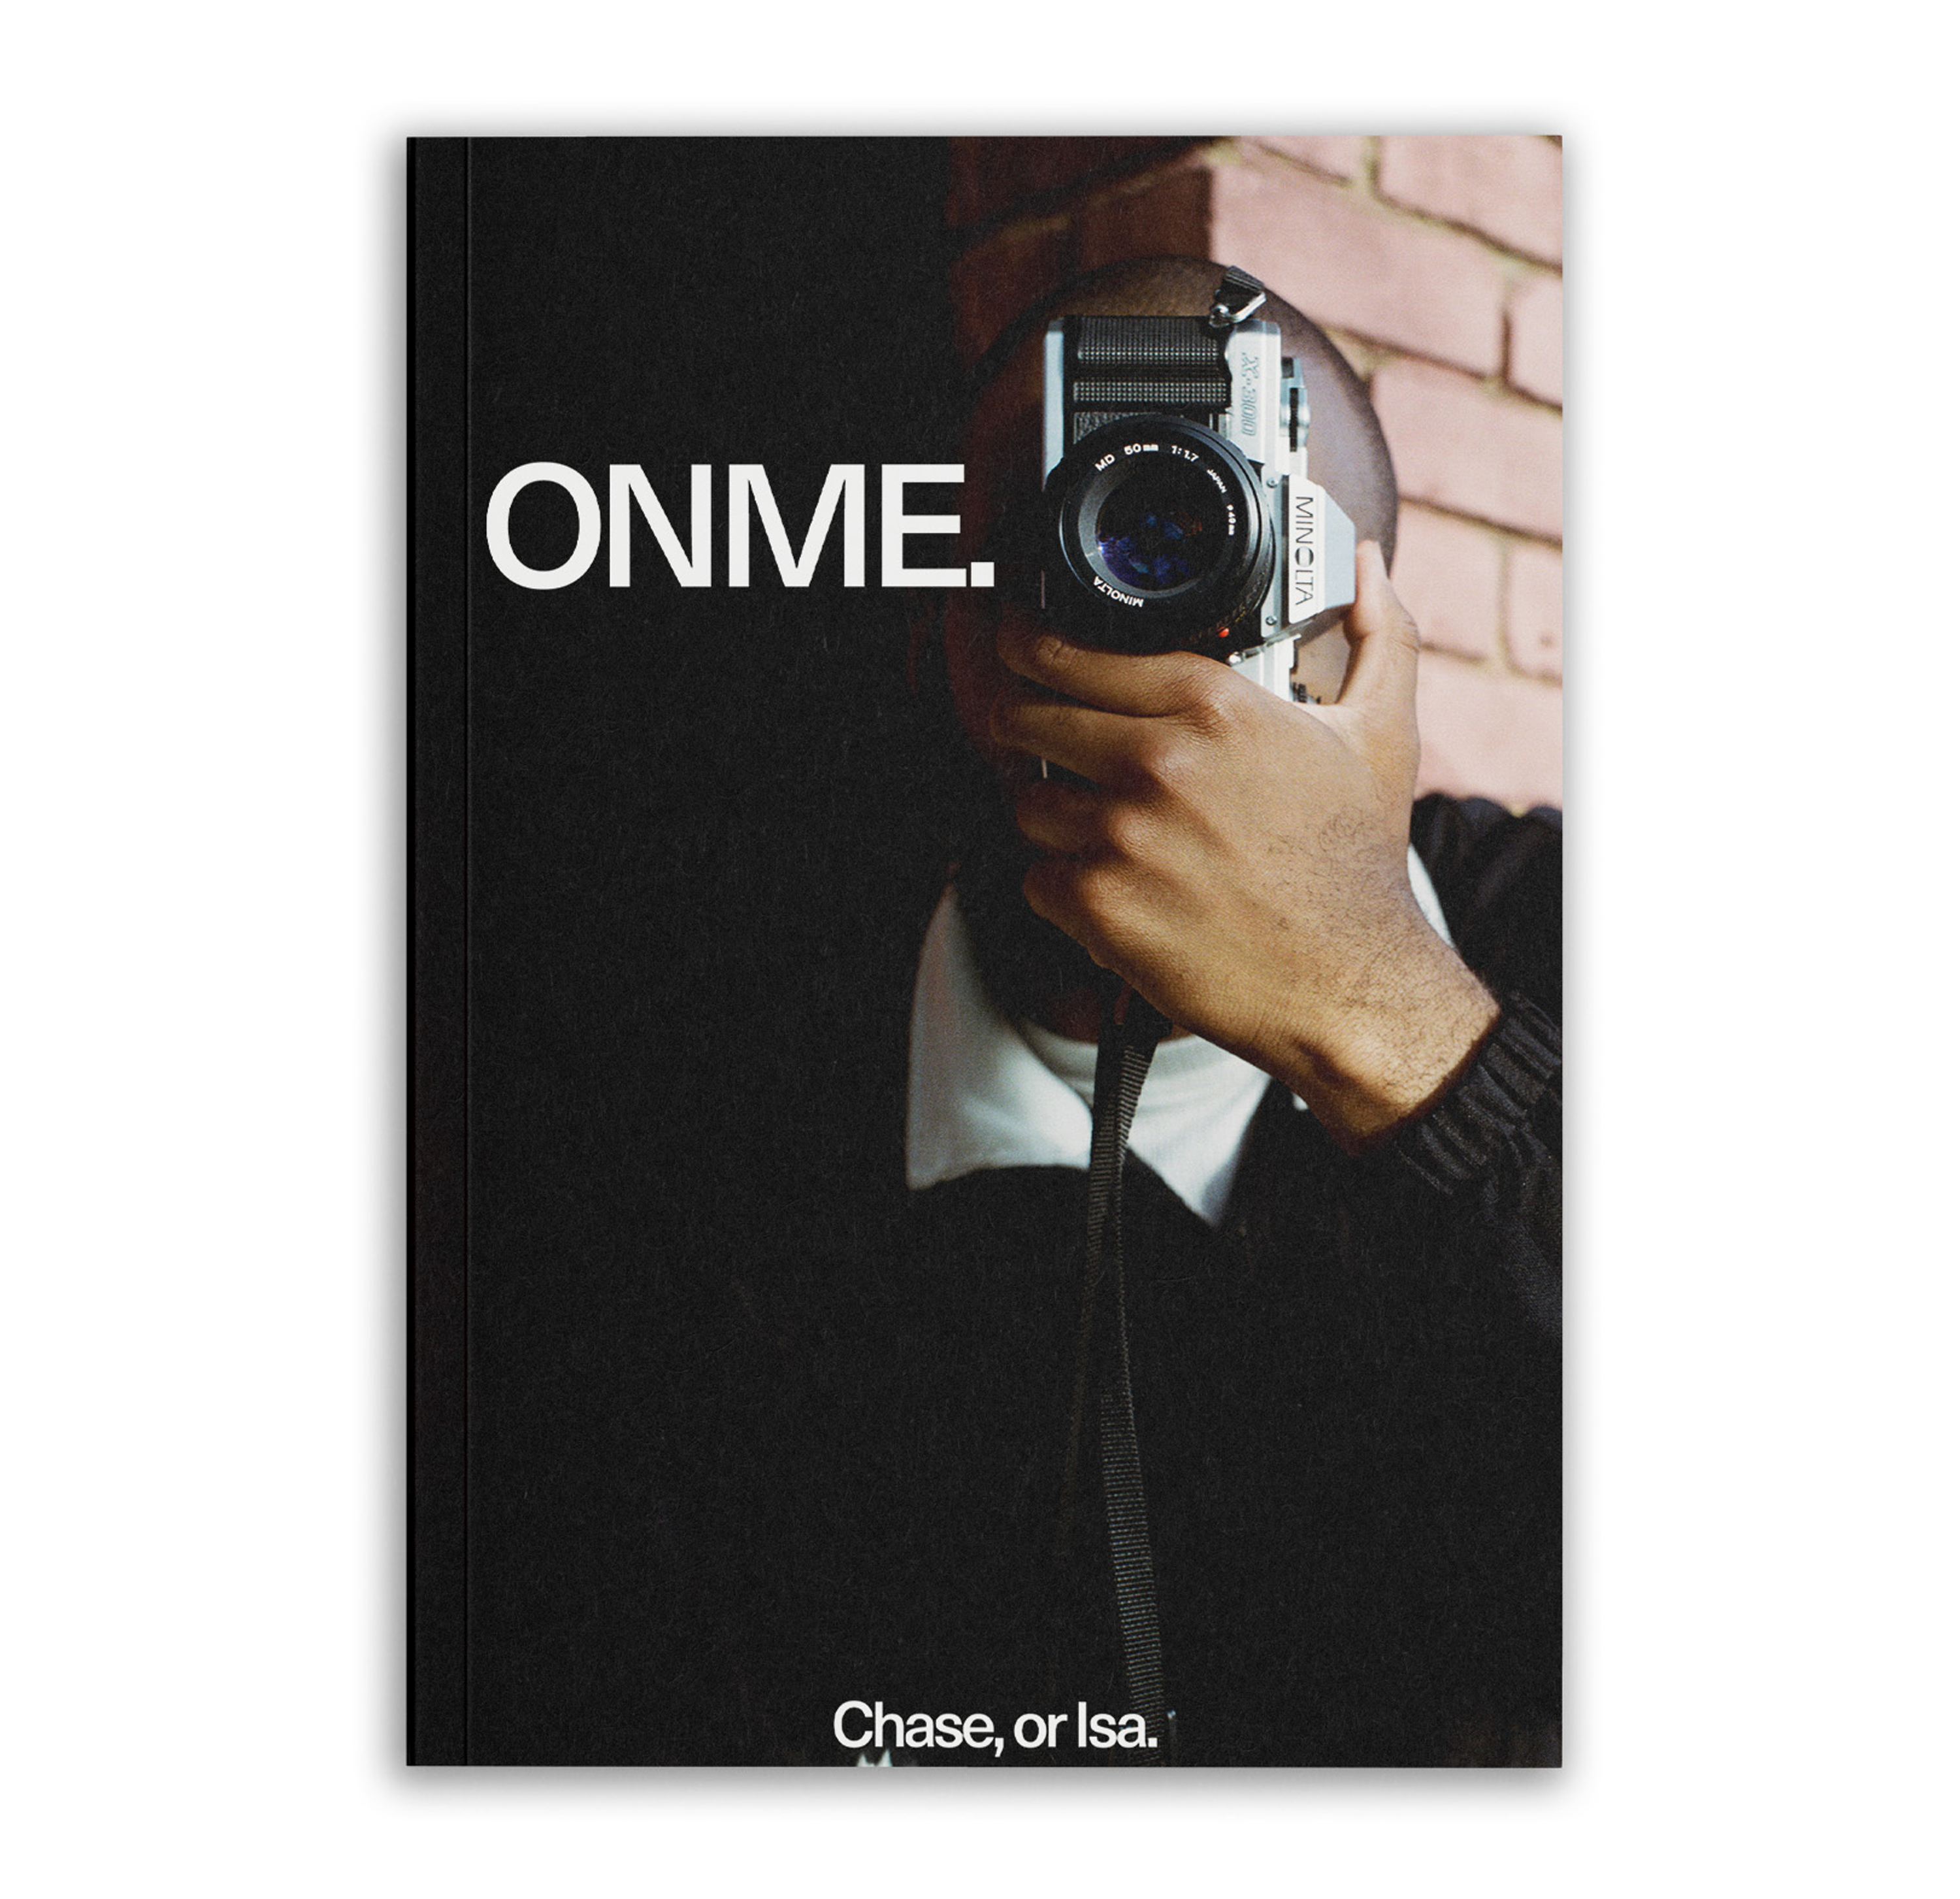 ONME.